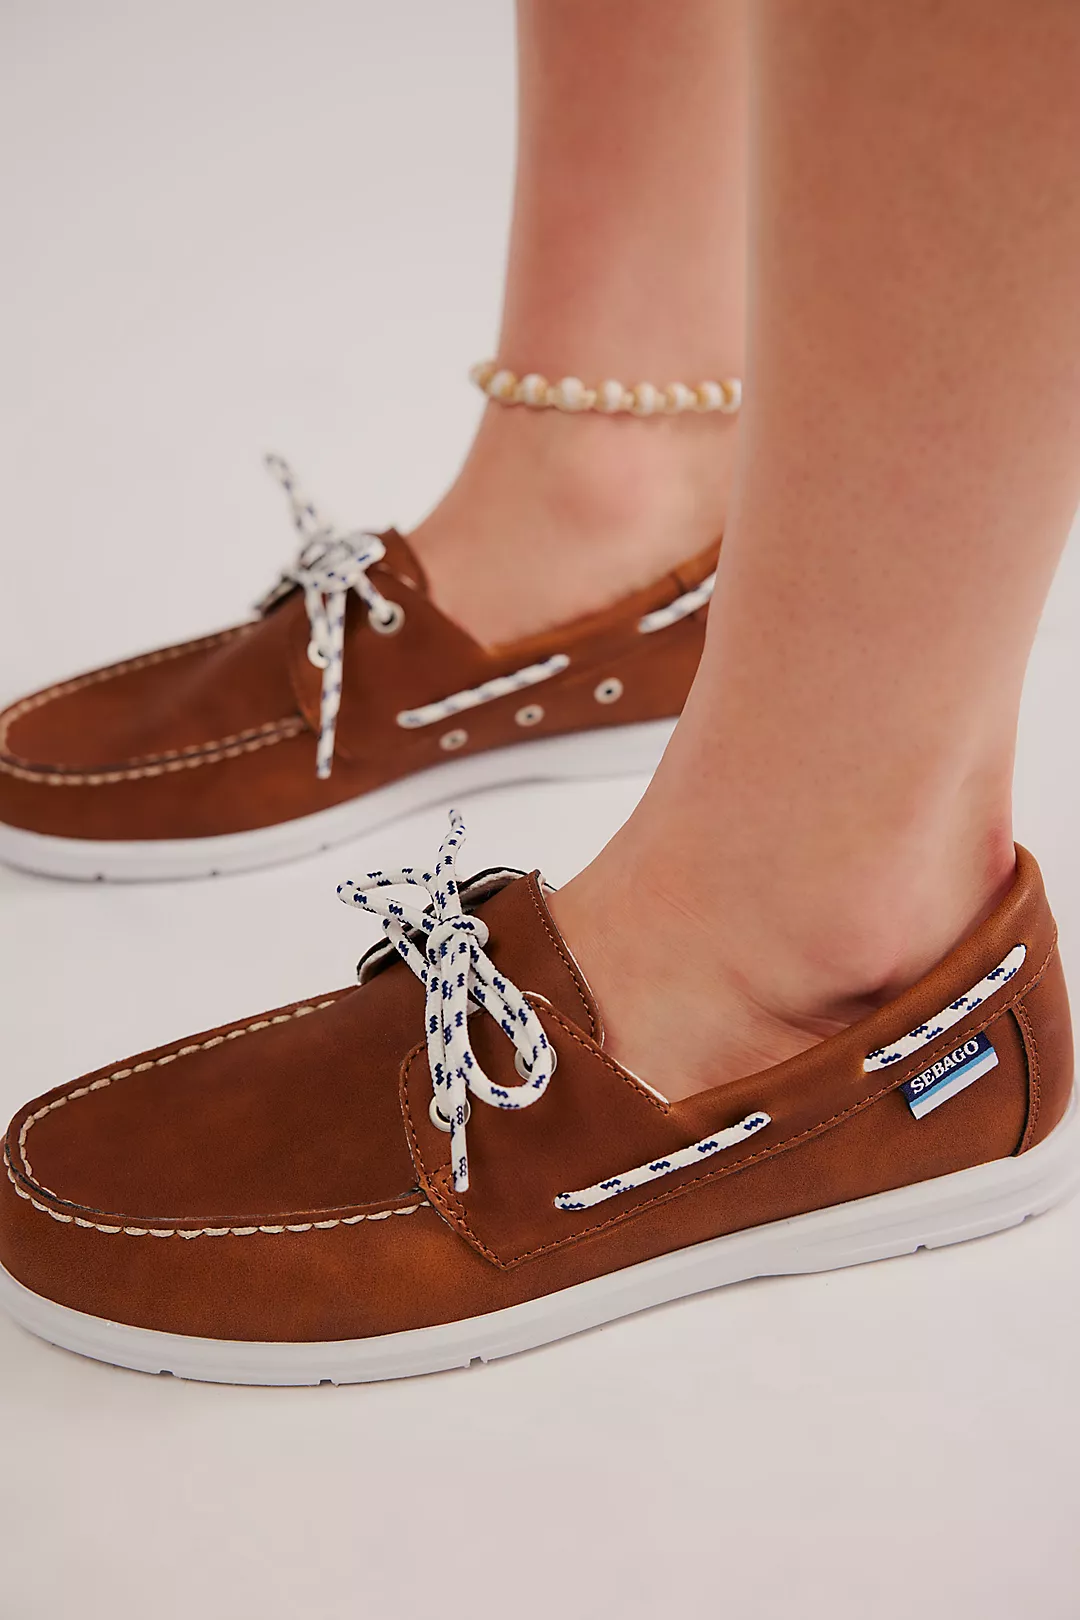 boat shoes